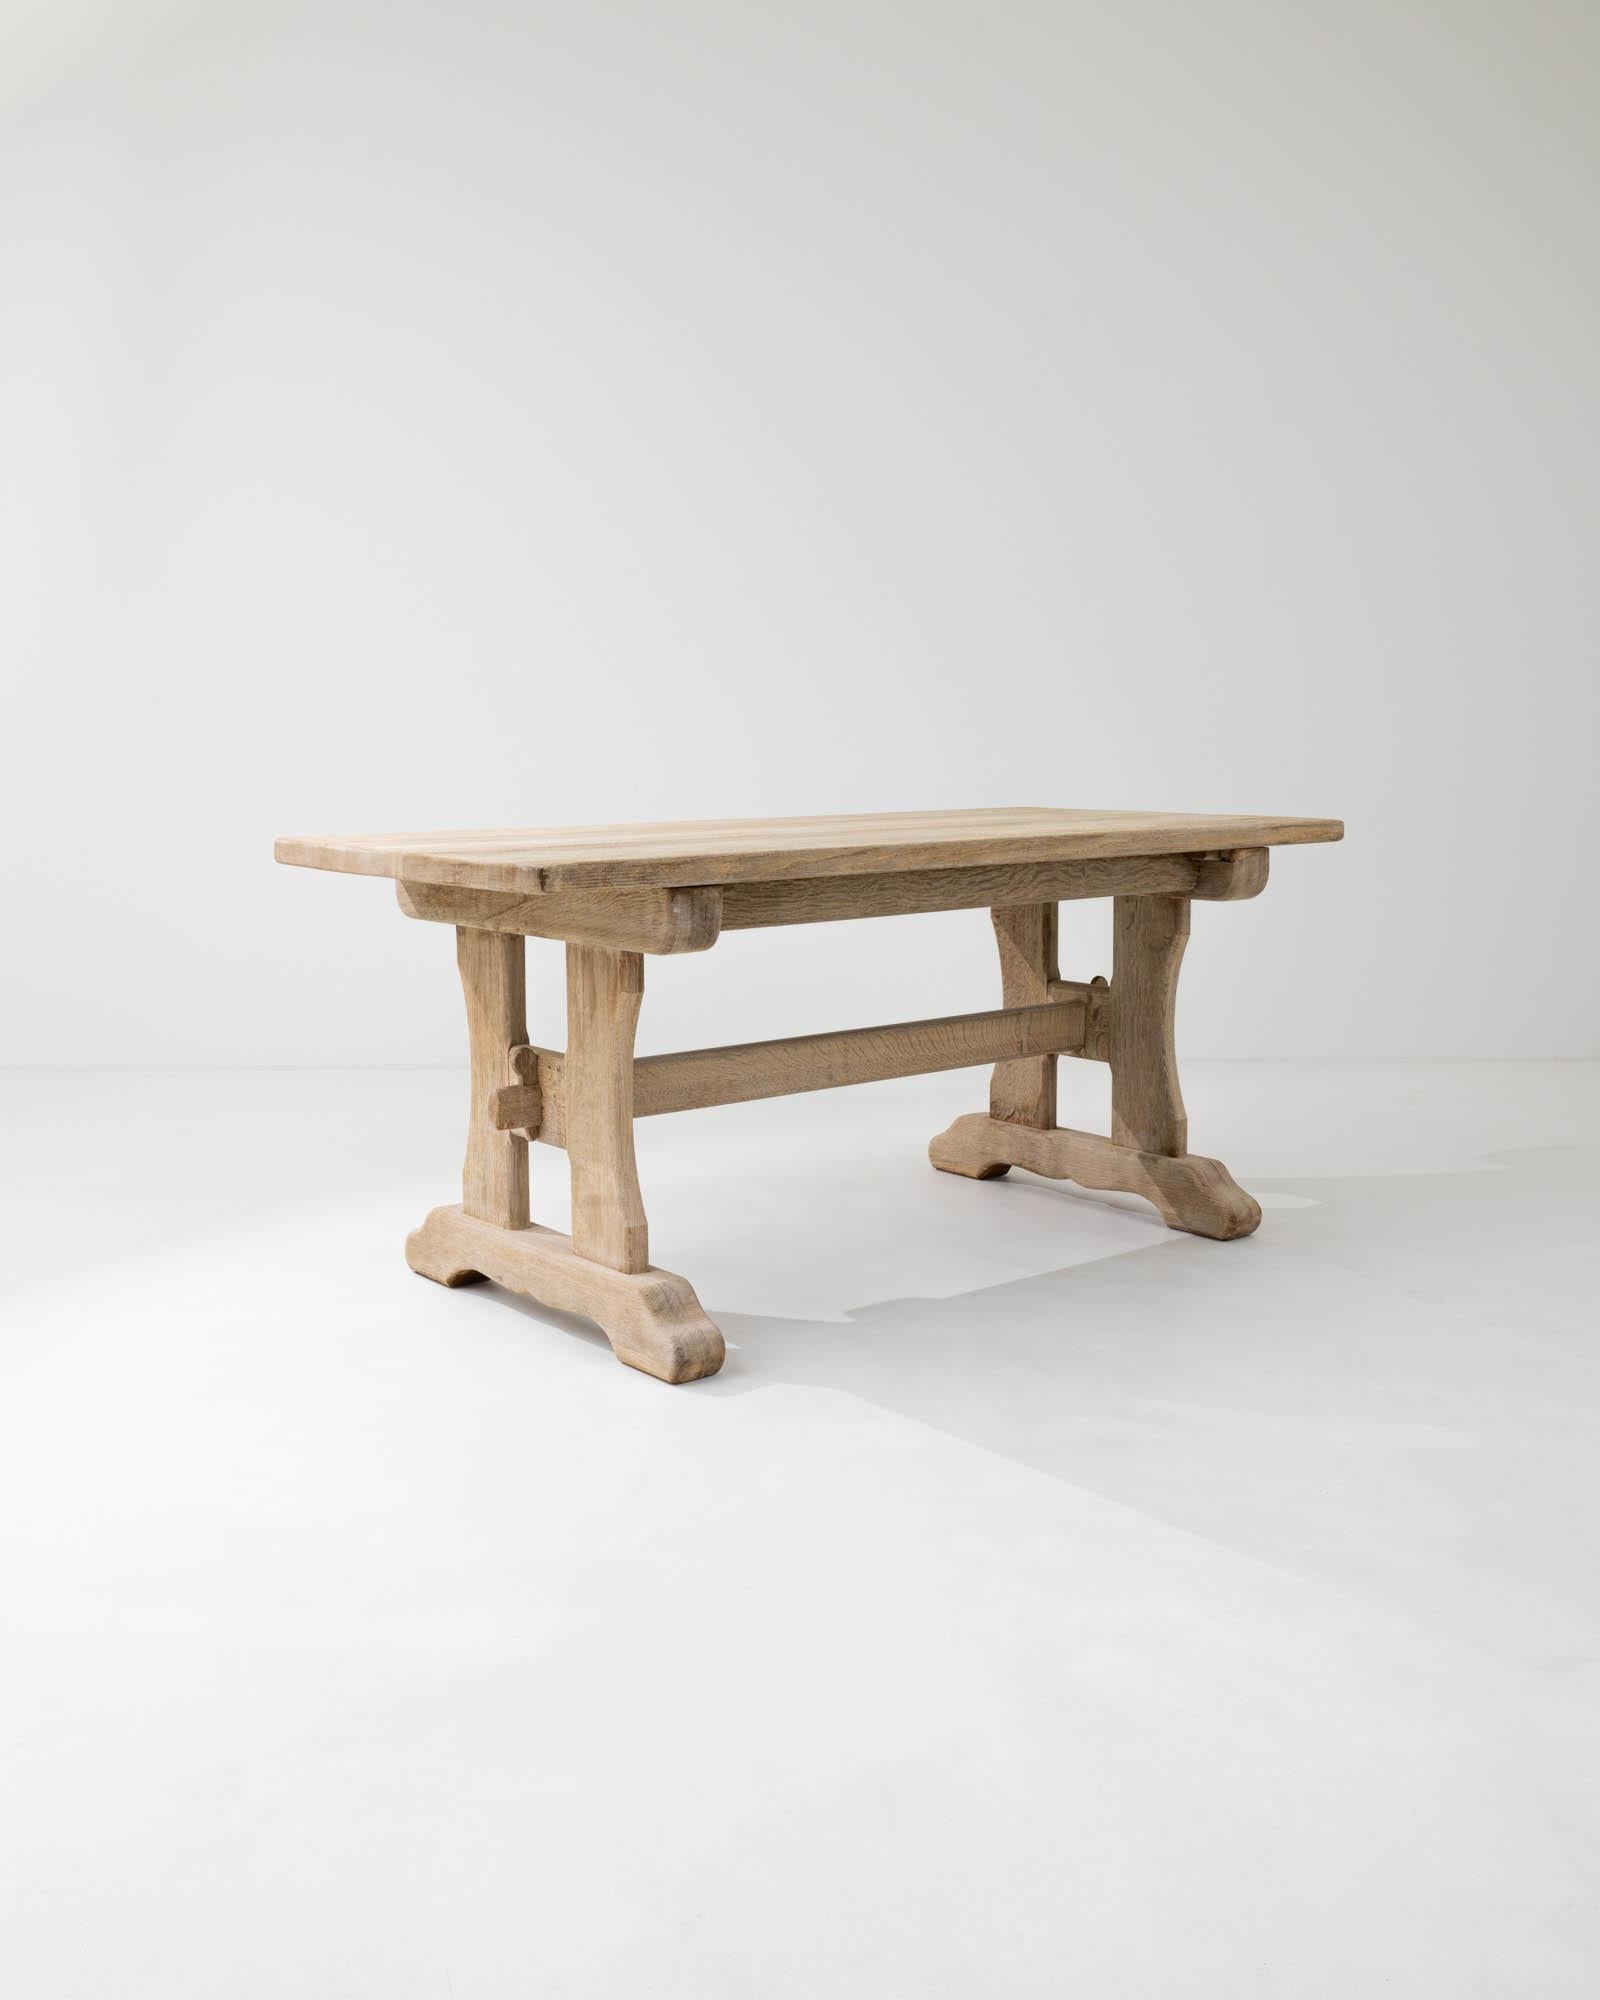 This vintage oak dining table offers a traditional design, beautifully crafted. Hand-built in Belgium in the 20th century, the rectangular tabletop sits atop a trestle base. The simple country silhouette is subtly embellished by the softly carved